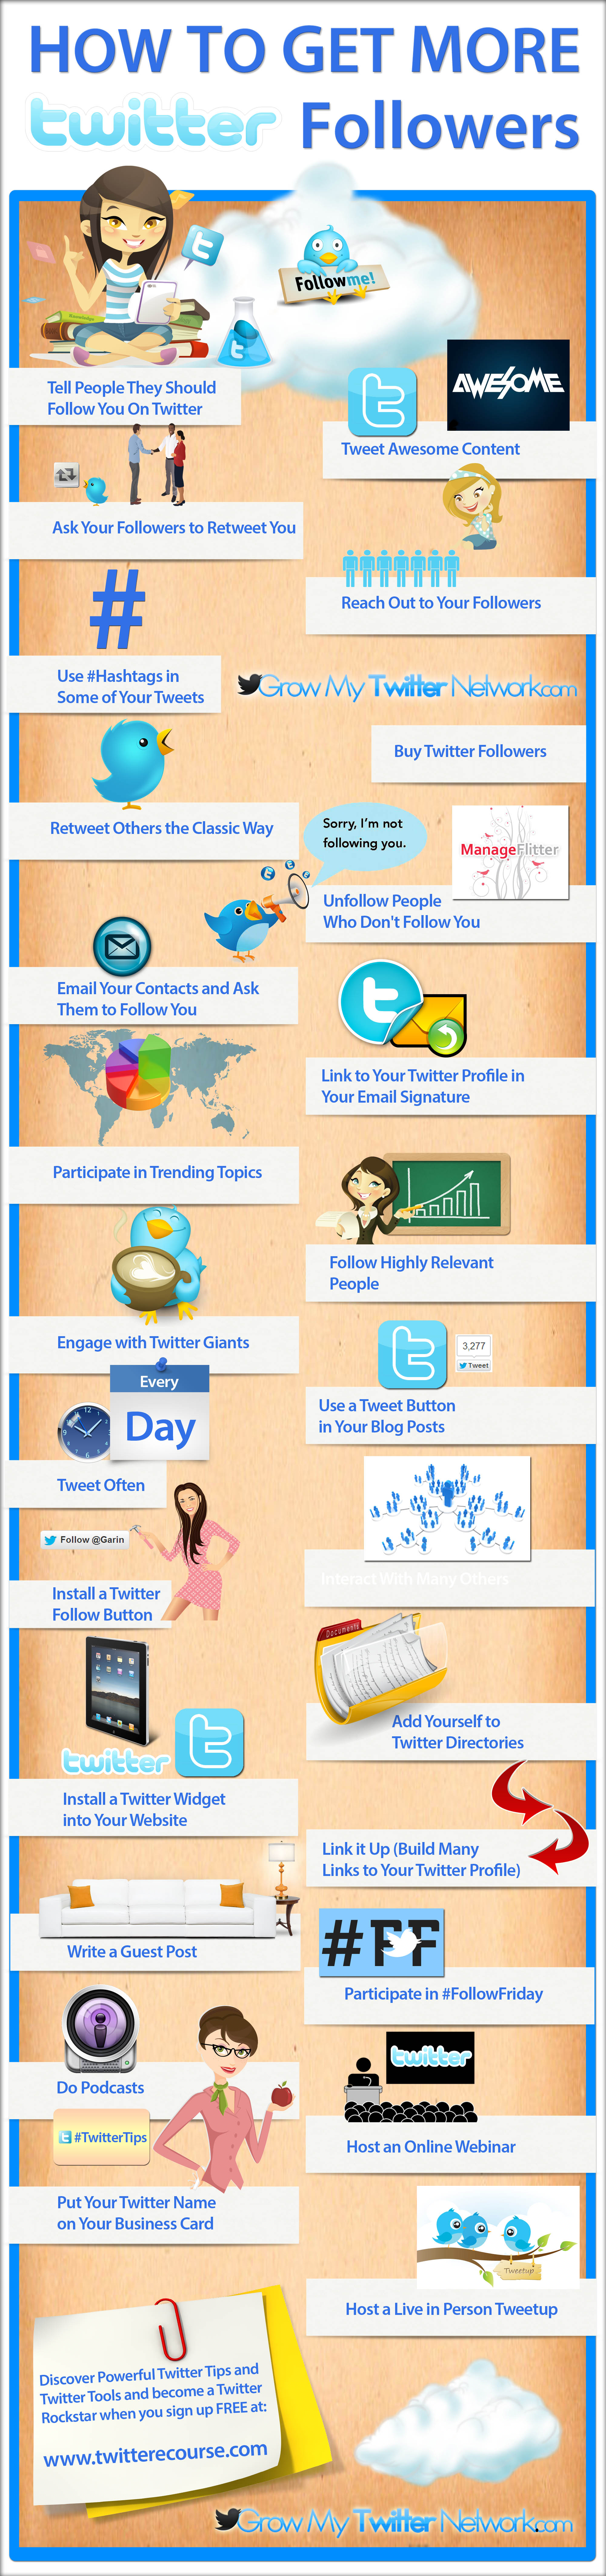 How To Get More Twitter Followers [Infographic]